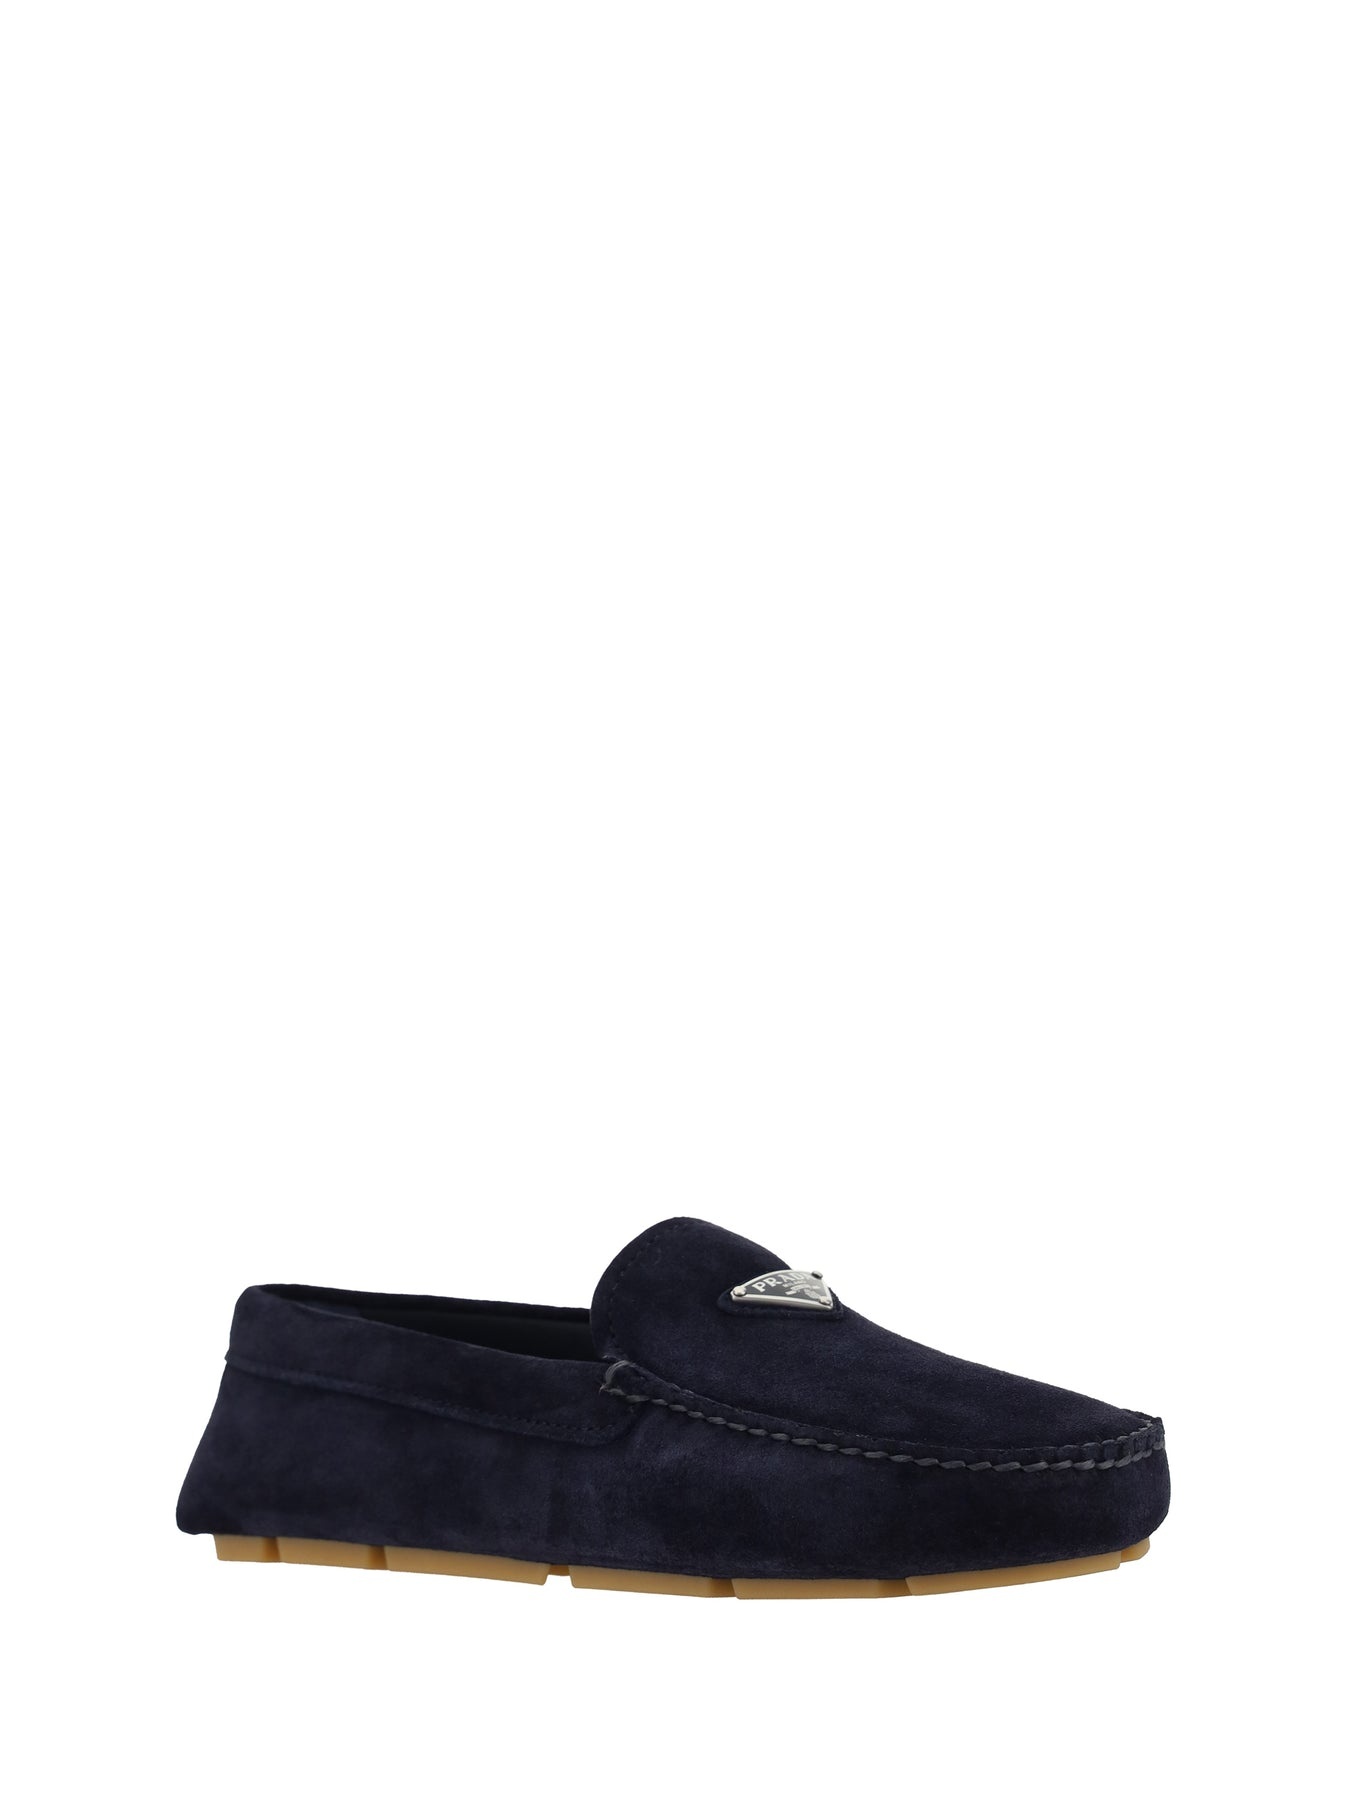 LOAFER SHOES - 2